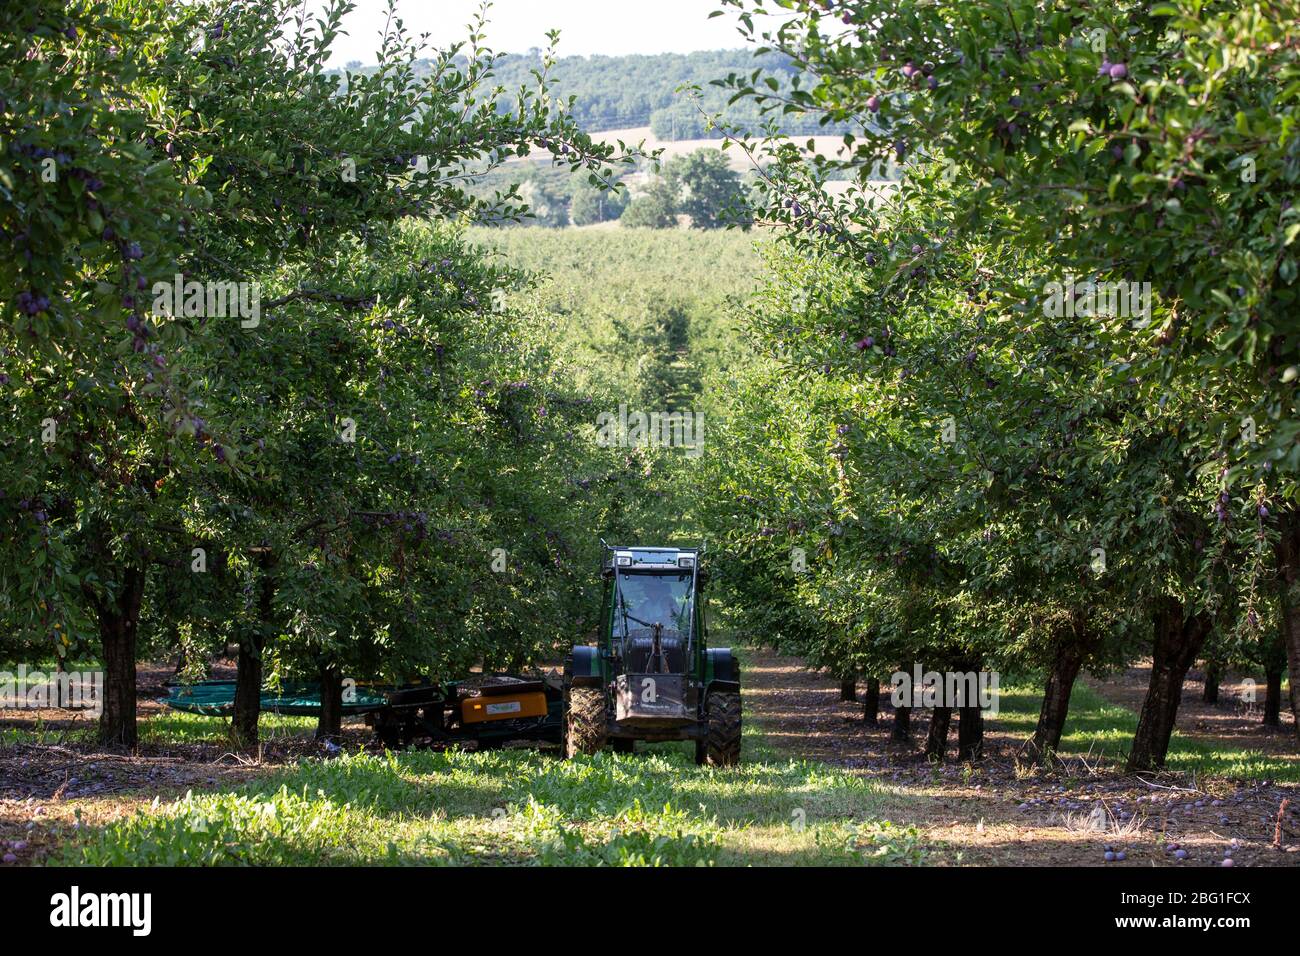 Plum farming in the agricultural region Lot-et-Garonne, which accounts for 65% of South West France's plum production, France, Europe Stock Photo